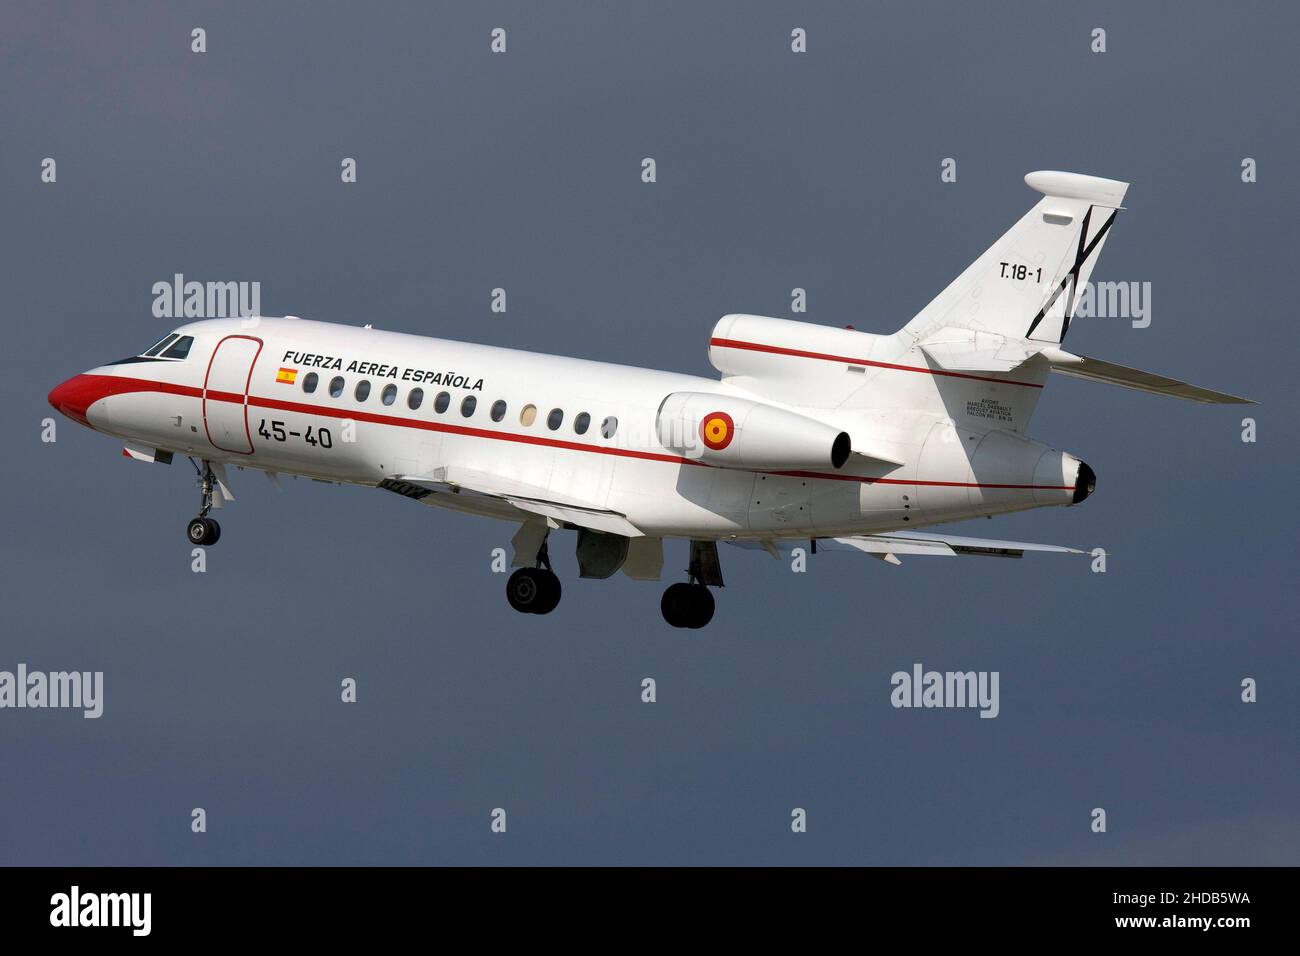 Spanish Air Force Dassault Falcon 900B (Reg.: T18-1) after lifting off from runway 31. Stock Photo